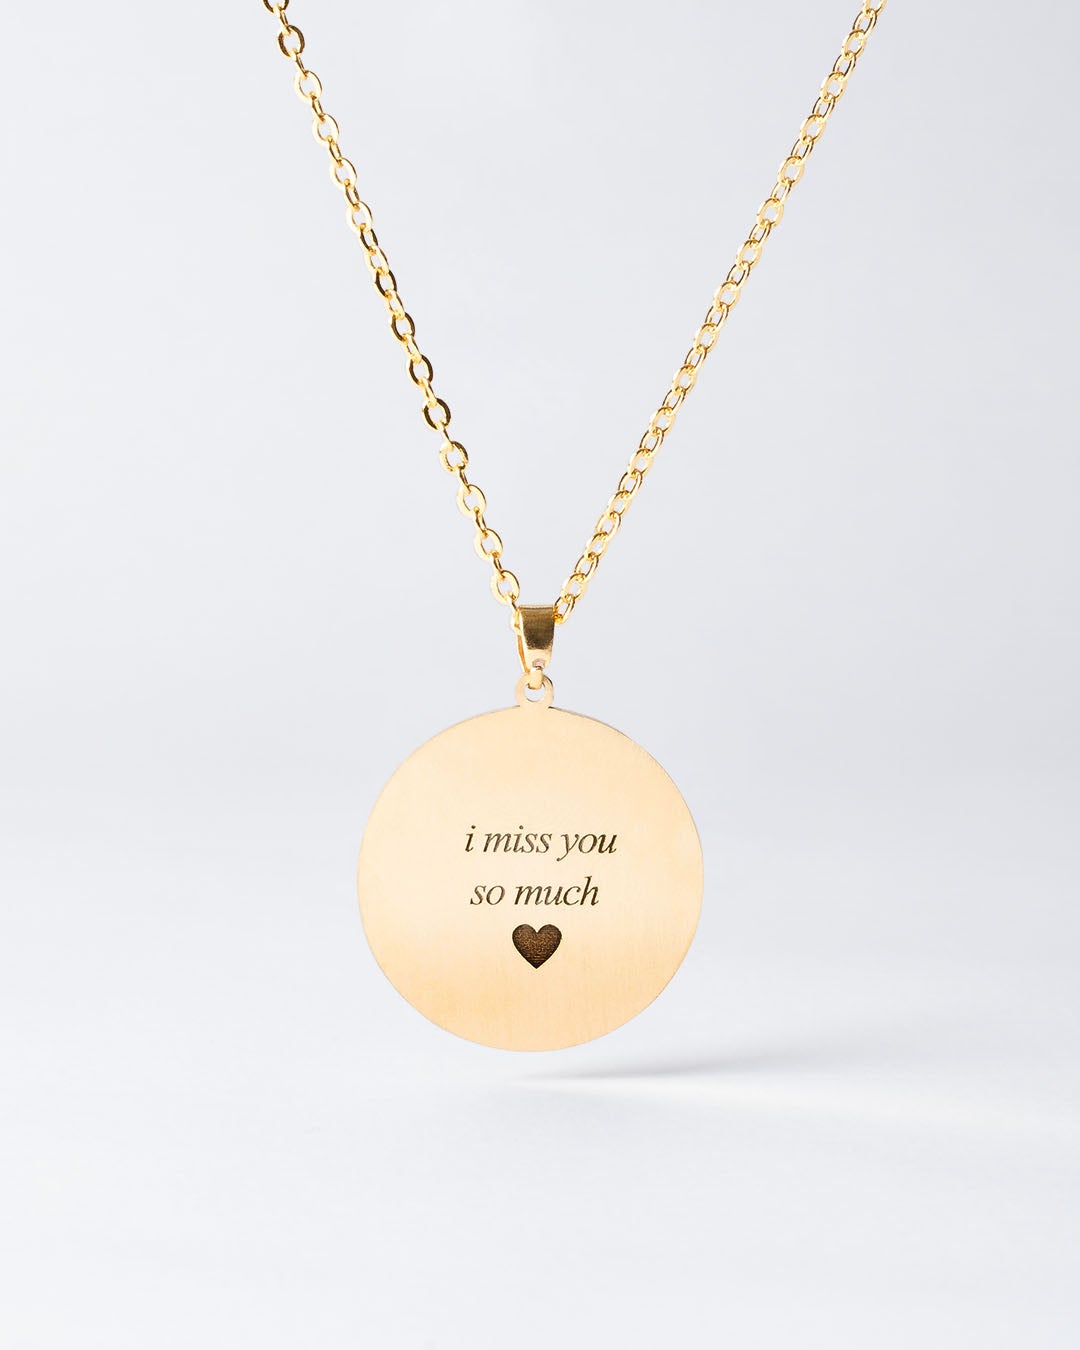 Pet memorial gifts, Gold medallion cat memorial necklace engraving